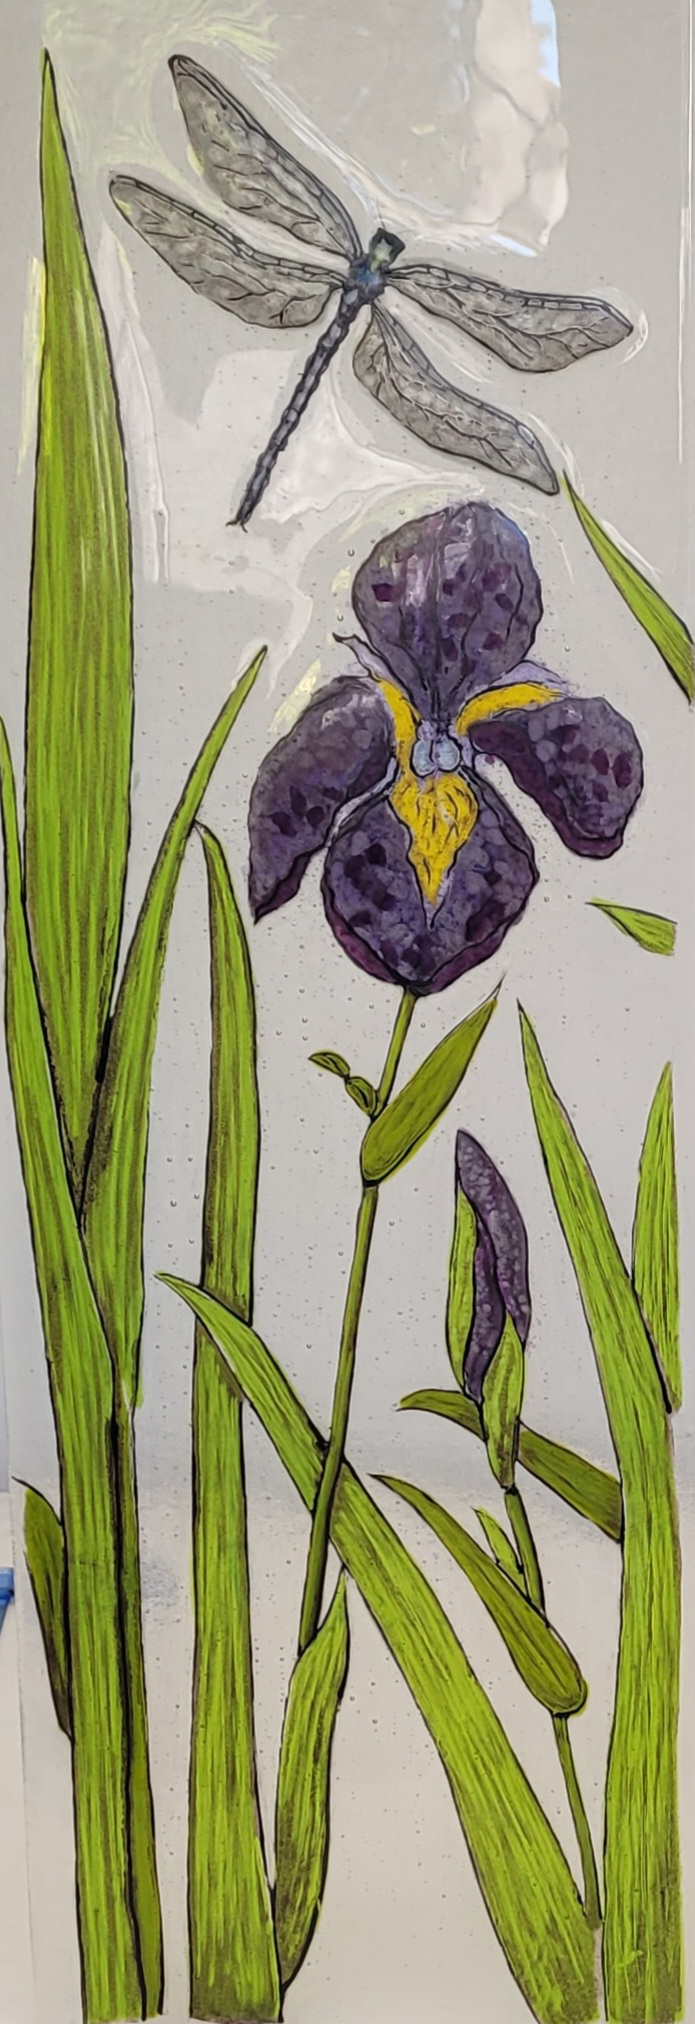 Iris Stained Glass Panel - Fused and Handpainted Glass